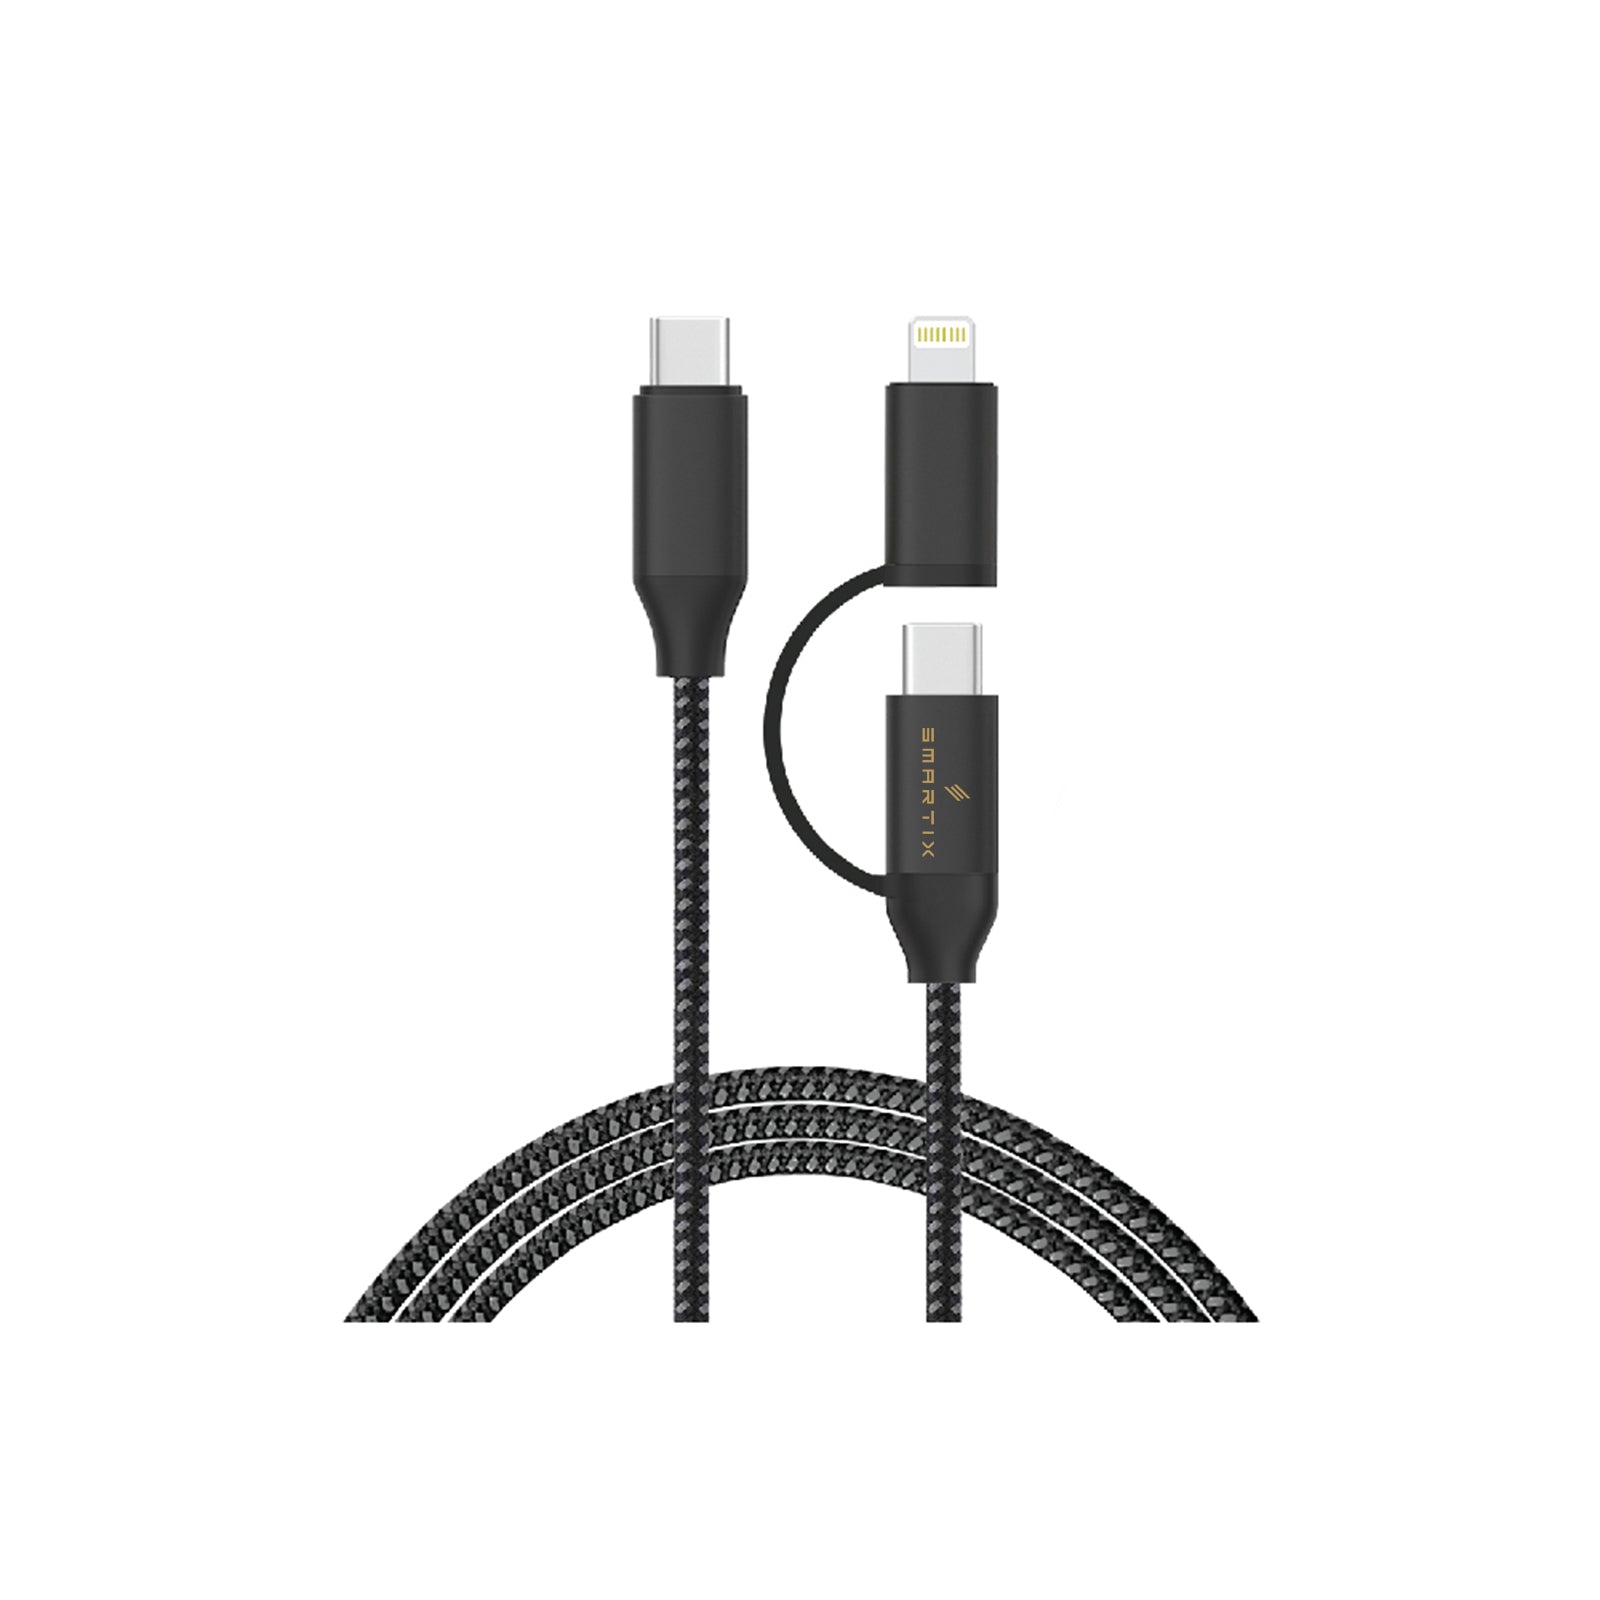 60W 2 in 1 Cable - Smart Infocomm